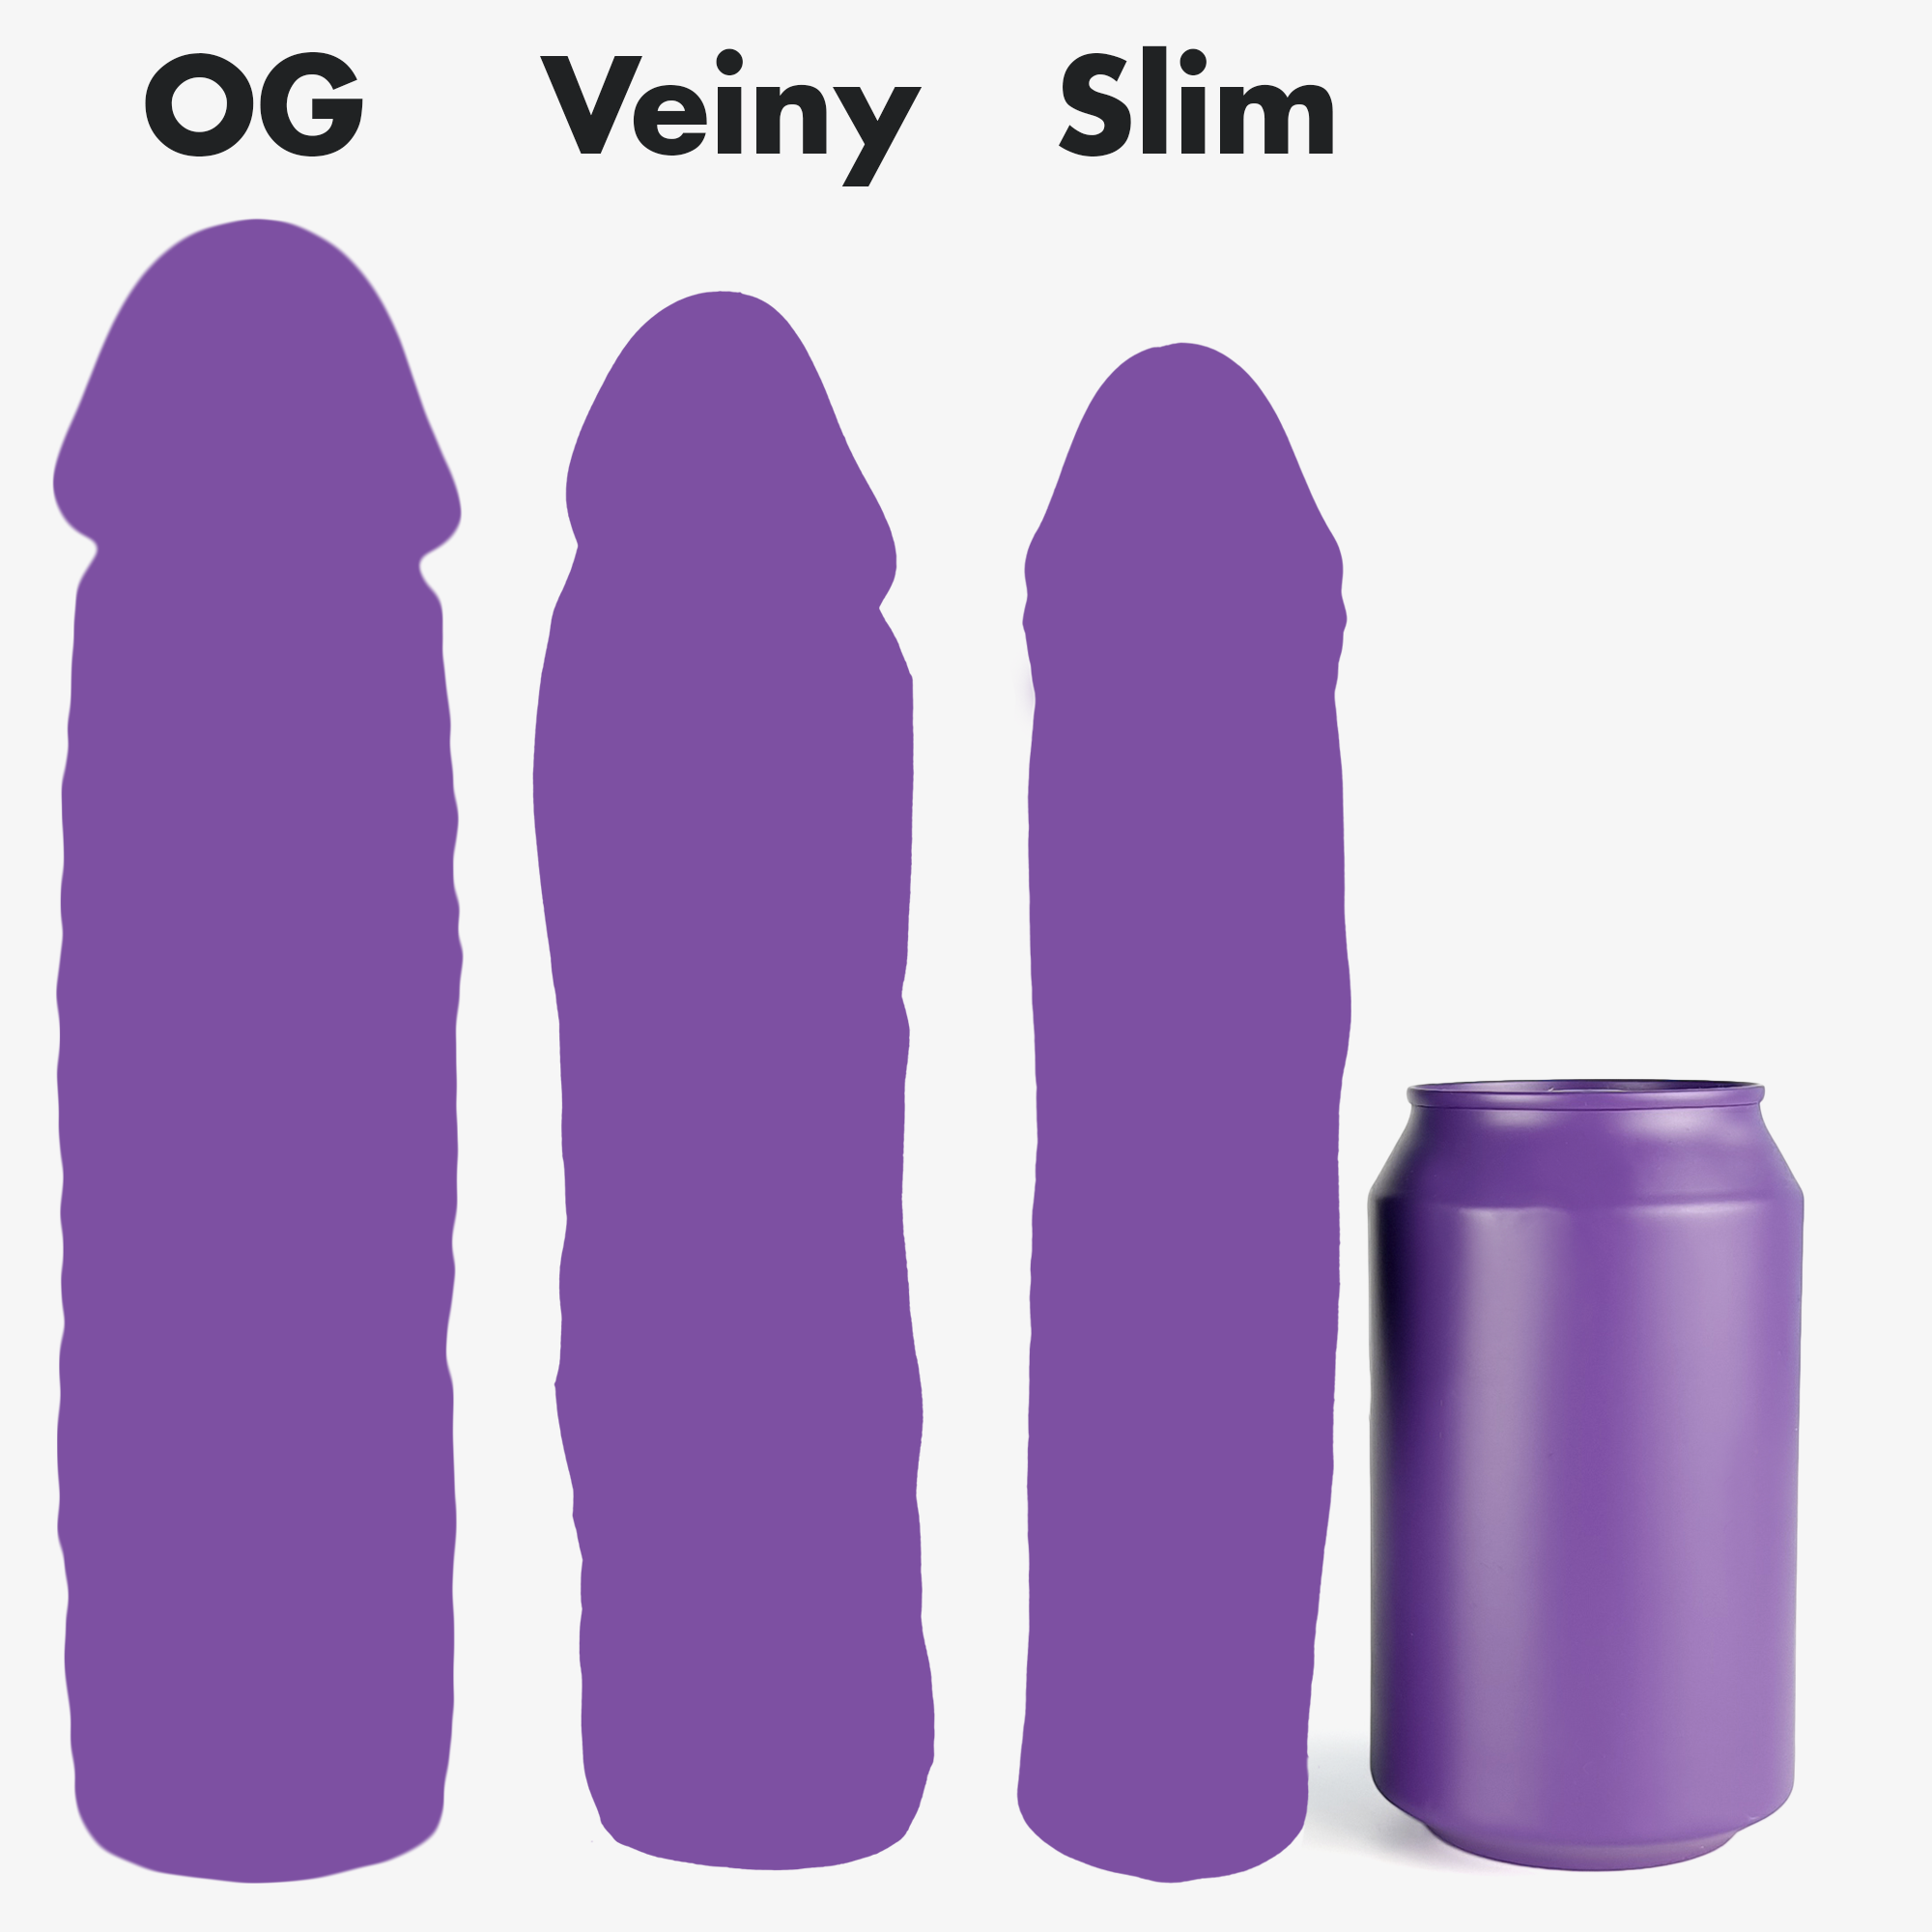 The Made To Measure Veiny One Penis Extender